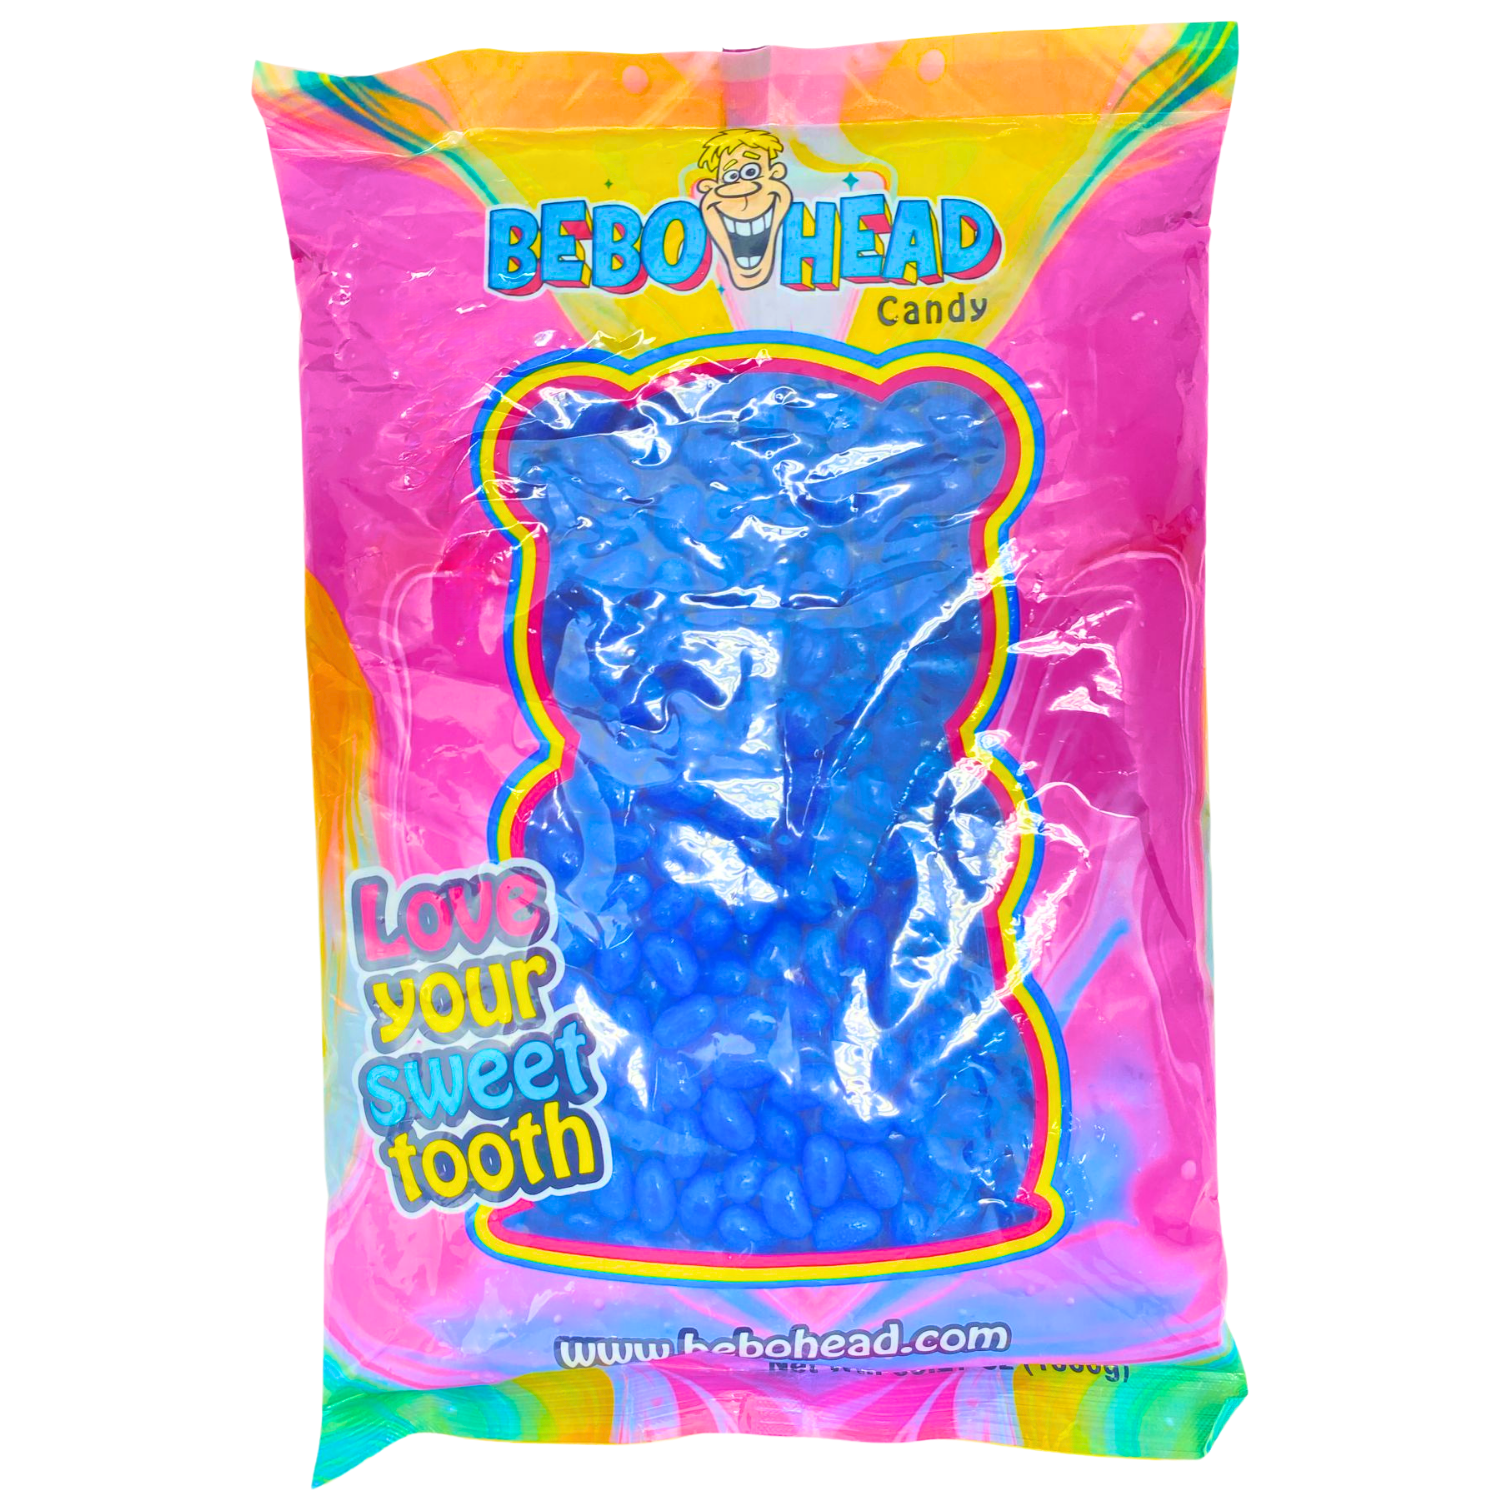 Blueberry Jelly Beans - 2.2 Pounds